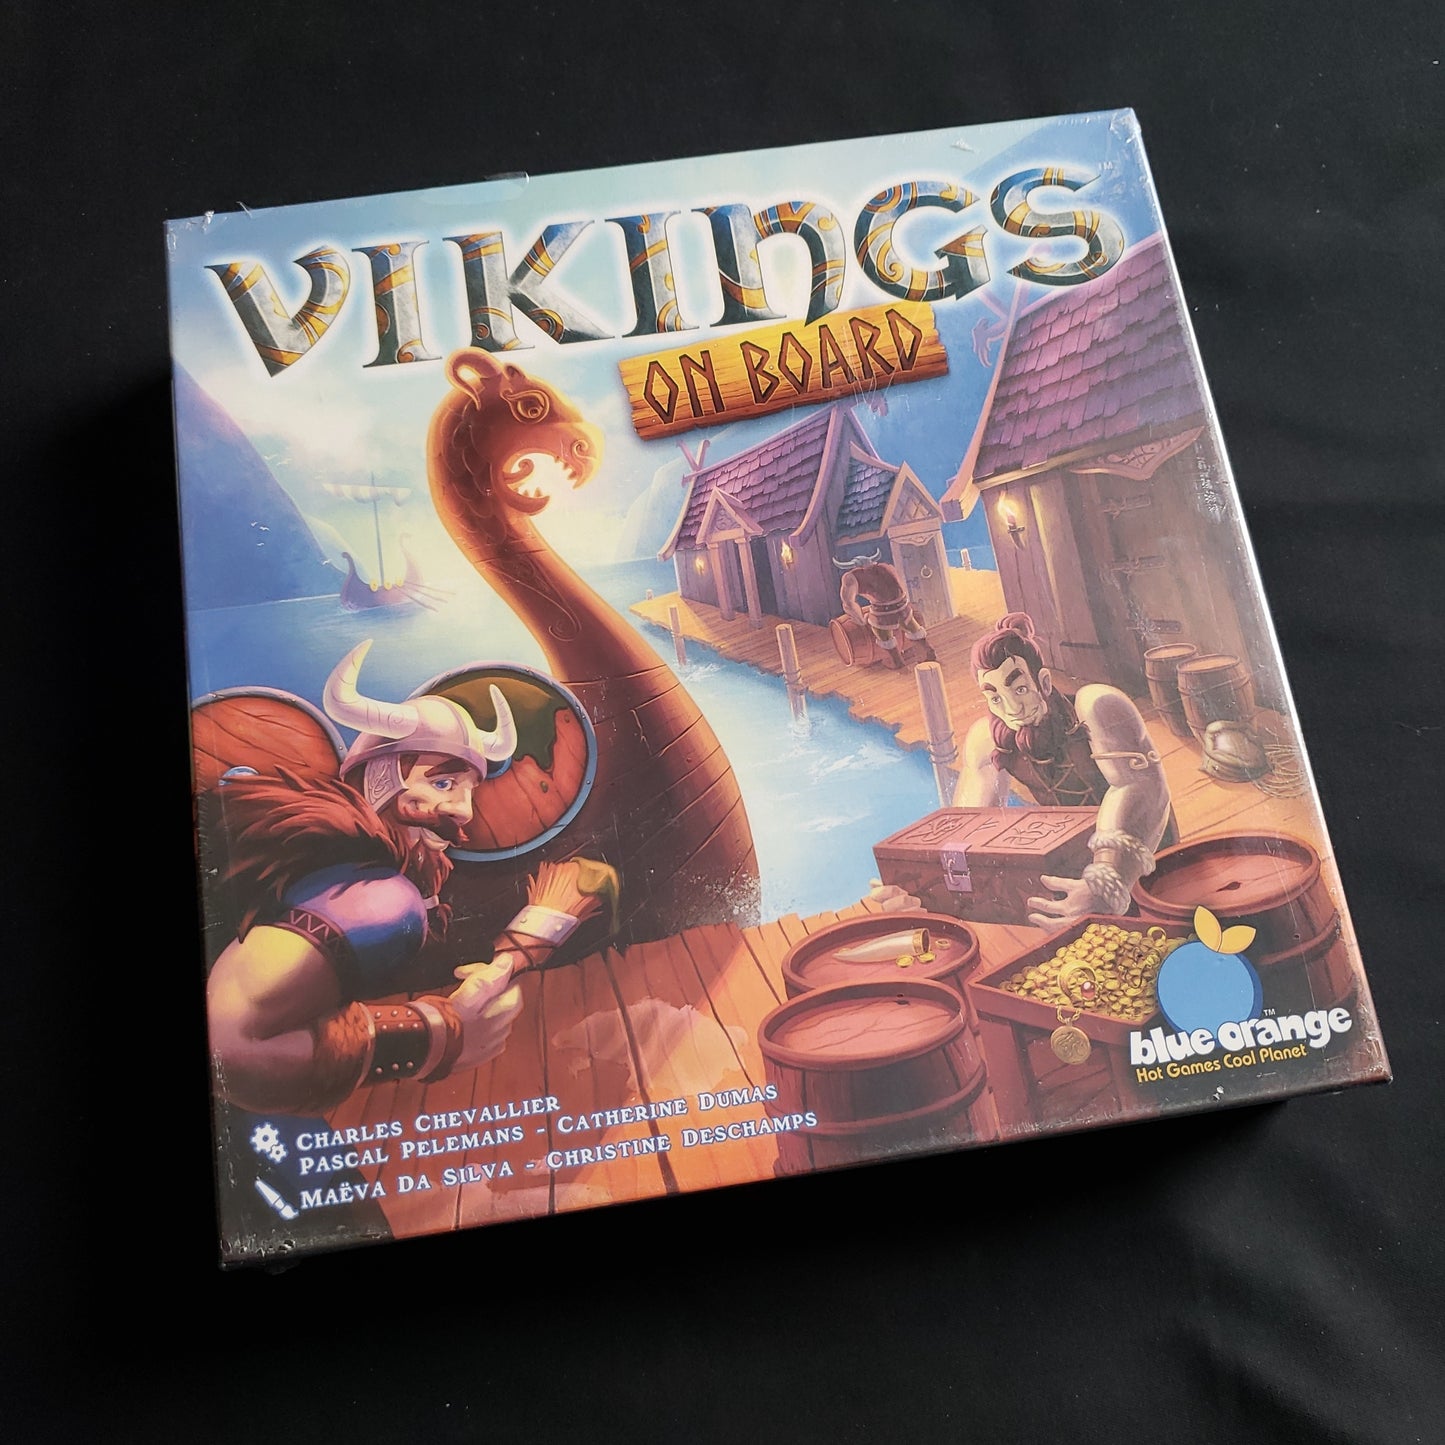 Image shows the front cover of the box of the Vikings On Board board game